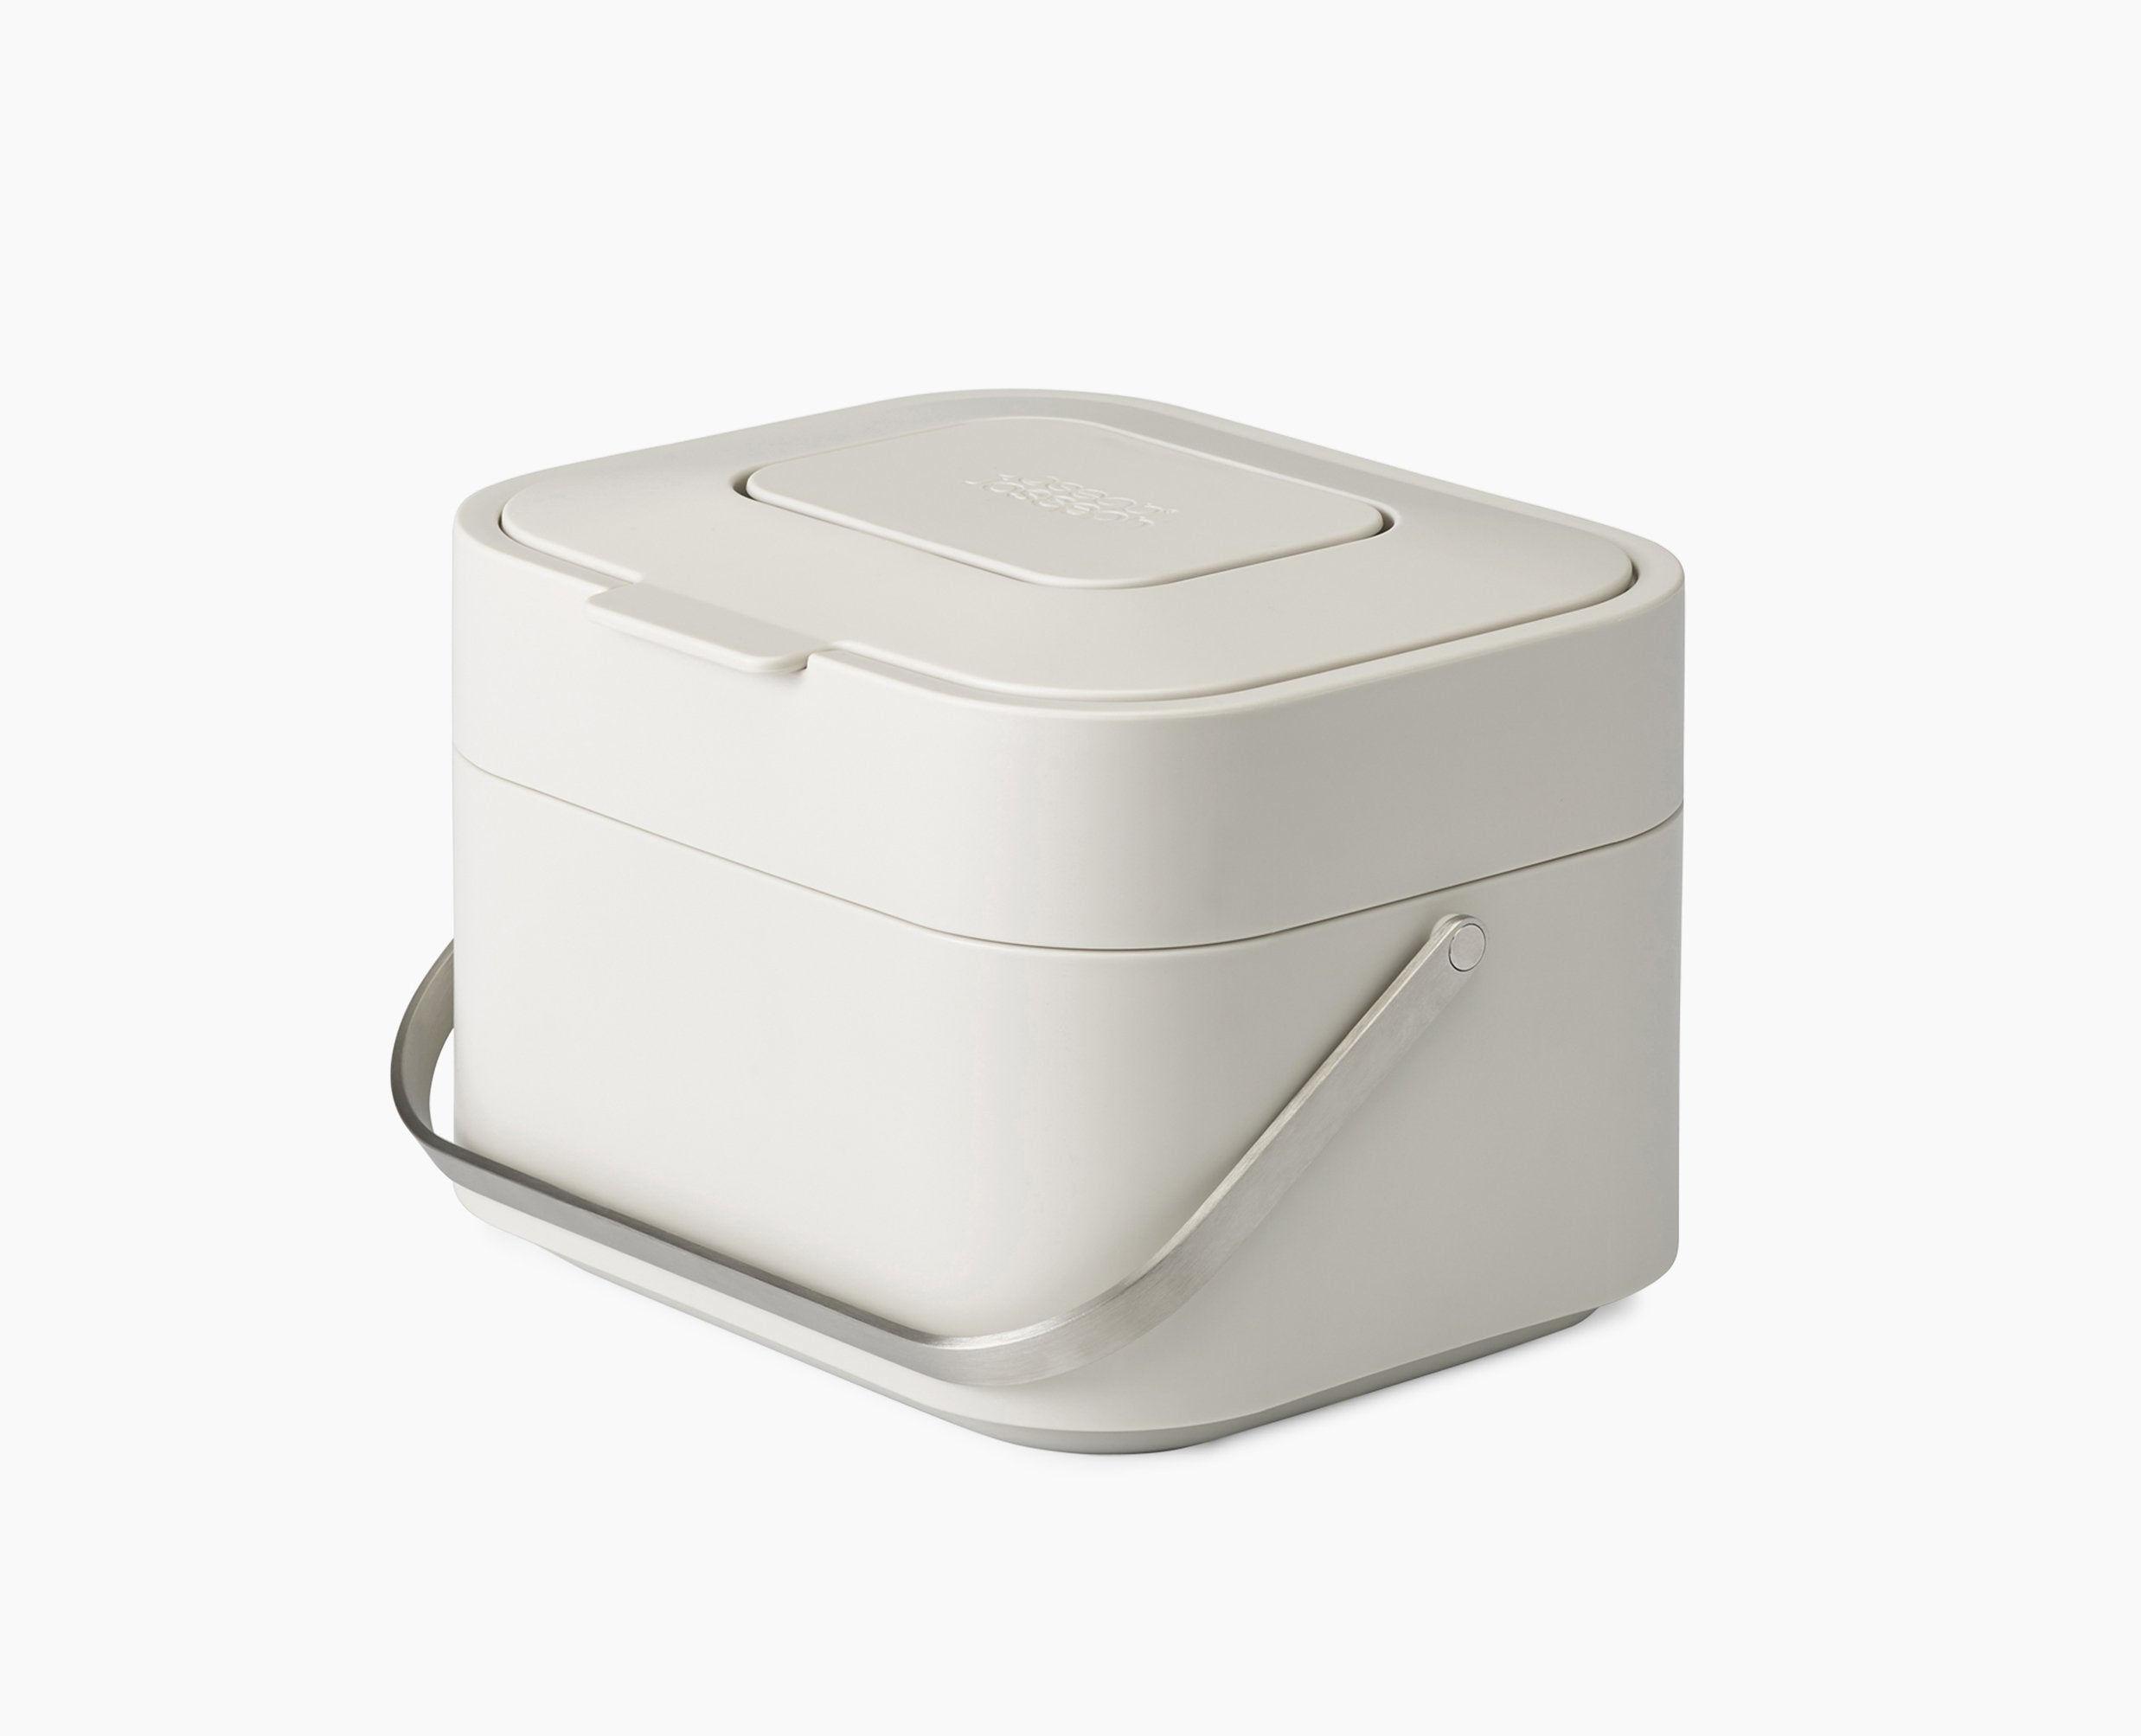 BEON.COM.AU  The unique ventilated design of this food waste caddy helps to reduce unpleasant odours from decomposing food.  Ventilated design reduces moisture and odours Replaceable odour filter in lid Easy-access flip-top lid Easy-clean polypropylene body and stainless-steel carry handle Liner-retaining ho... Joseph Joseph at BEON.COM.AU